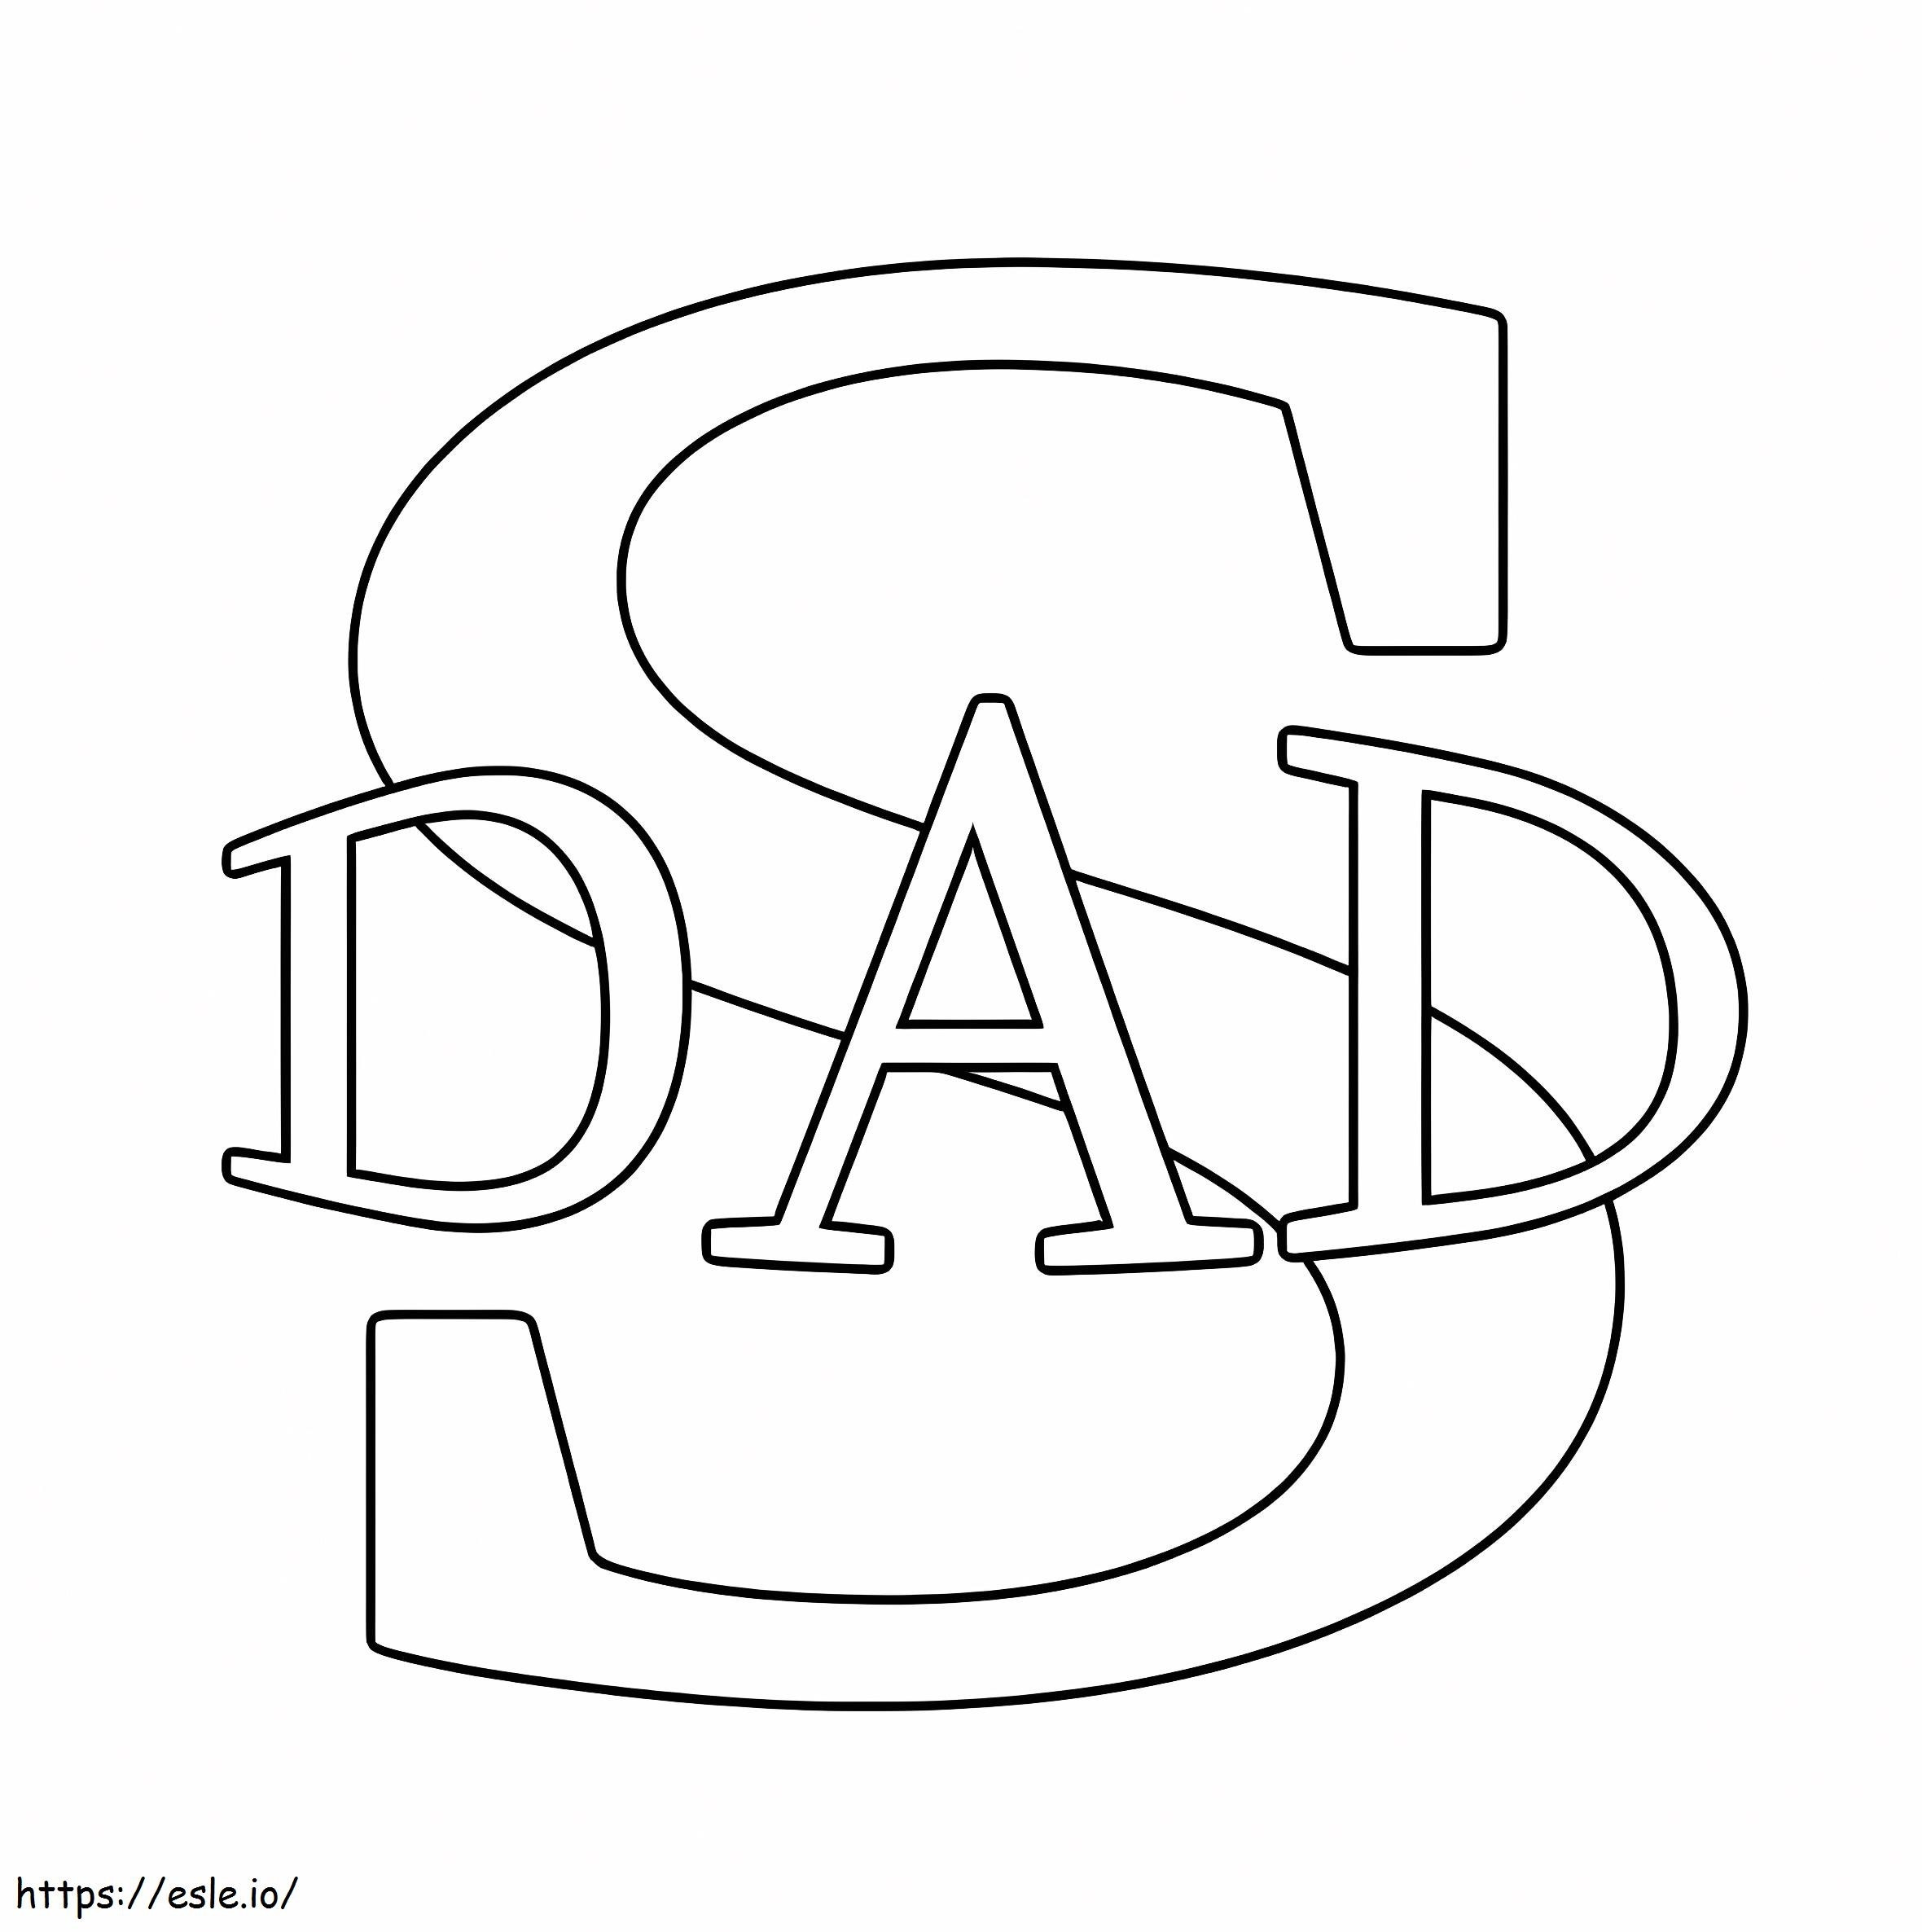 Super Dad Happy Fathers Day coloring page